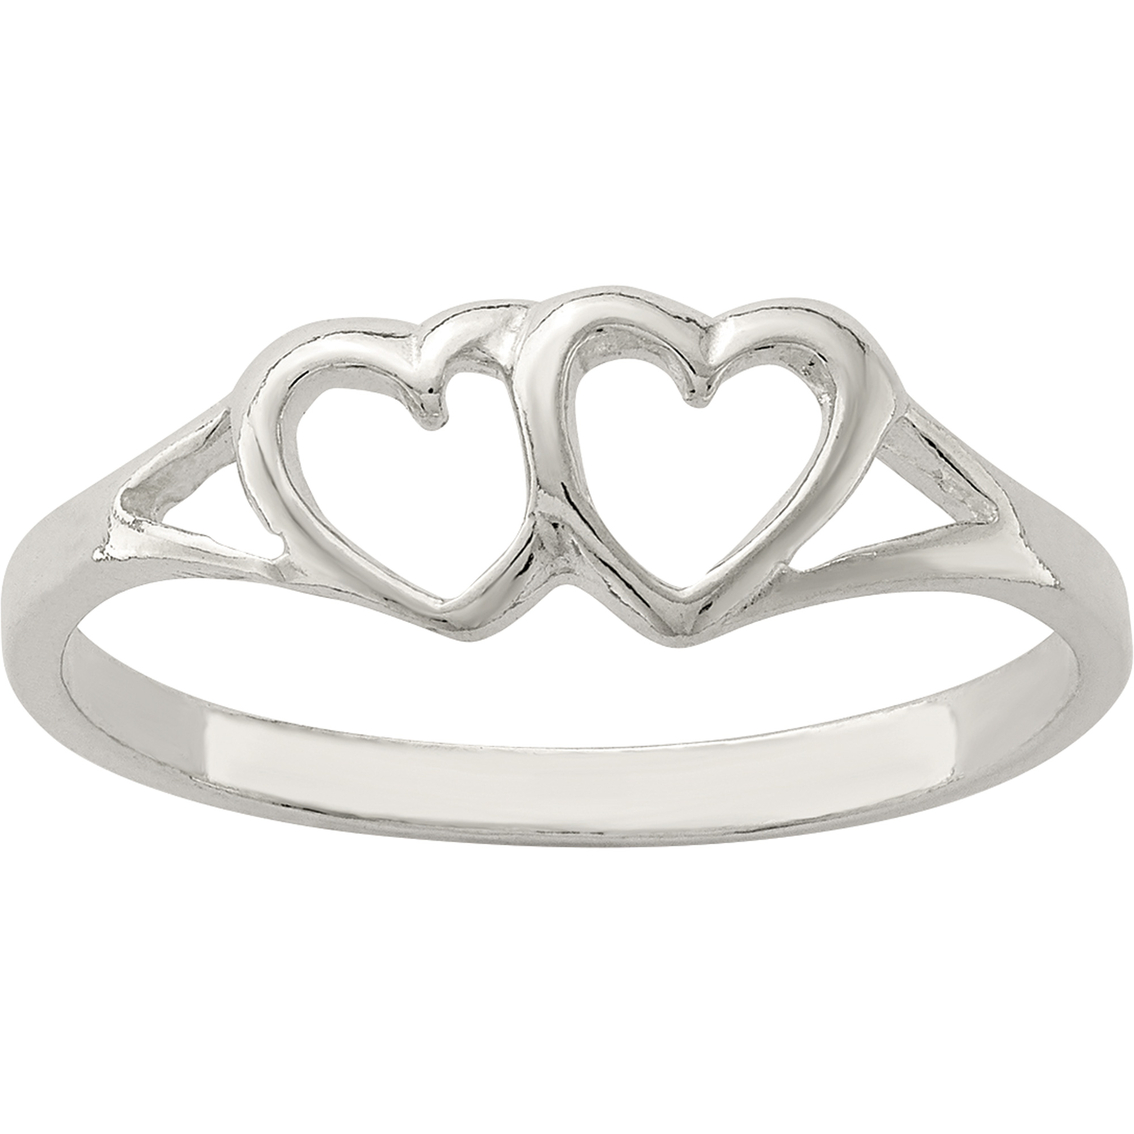 Sterling Silver Heart Ring Size 7 | Silver Rings | Jewelry & Watches ...